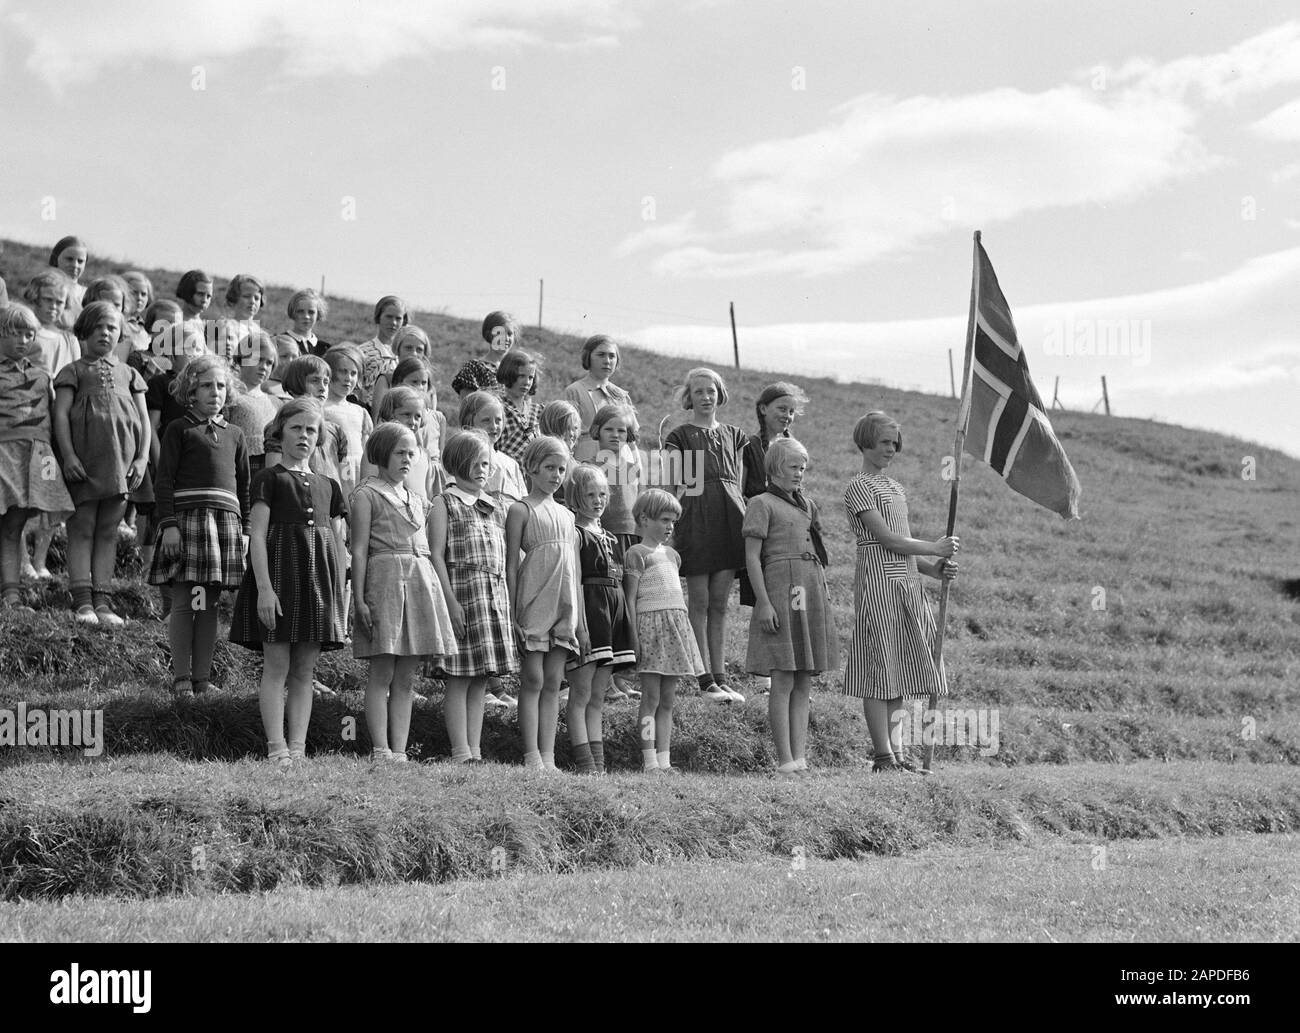 Iceland Description: Alafoss. Young girls, one of whom bearing the Icelandic flag, are lined up in line on the steps of an amphitheater Date: 1934 Location: Iceland, Àlafoss Keywords: amphitheatres, girls, ceremonies, flags Stock Photo